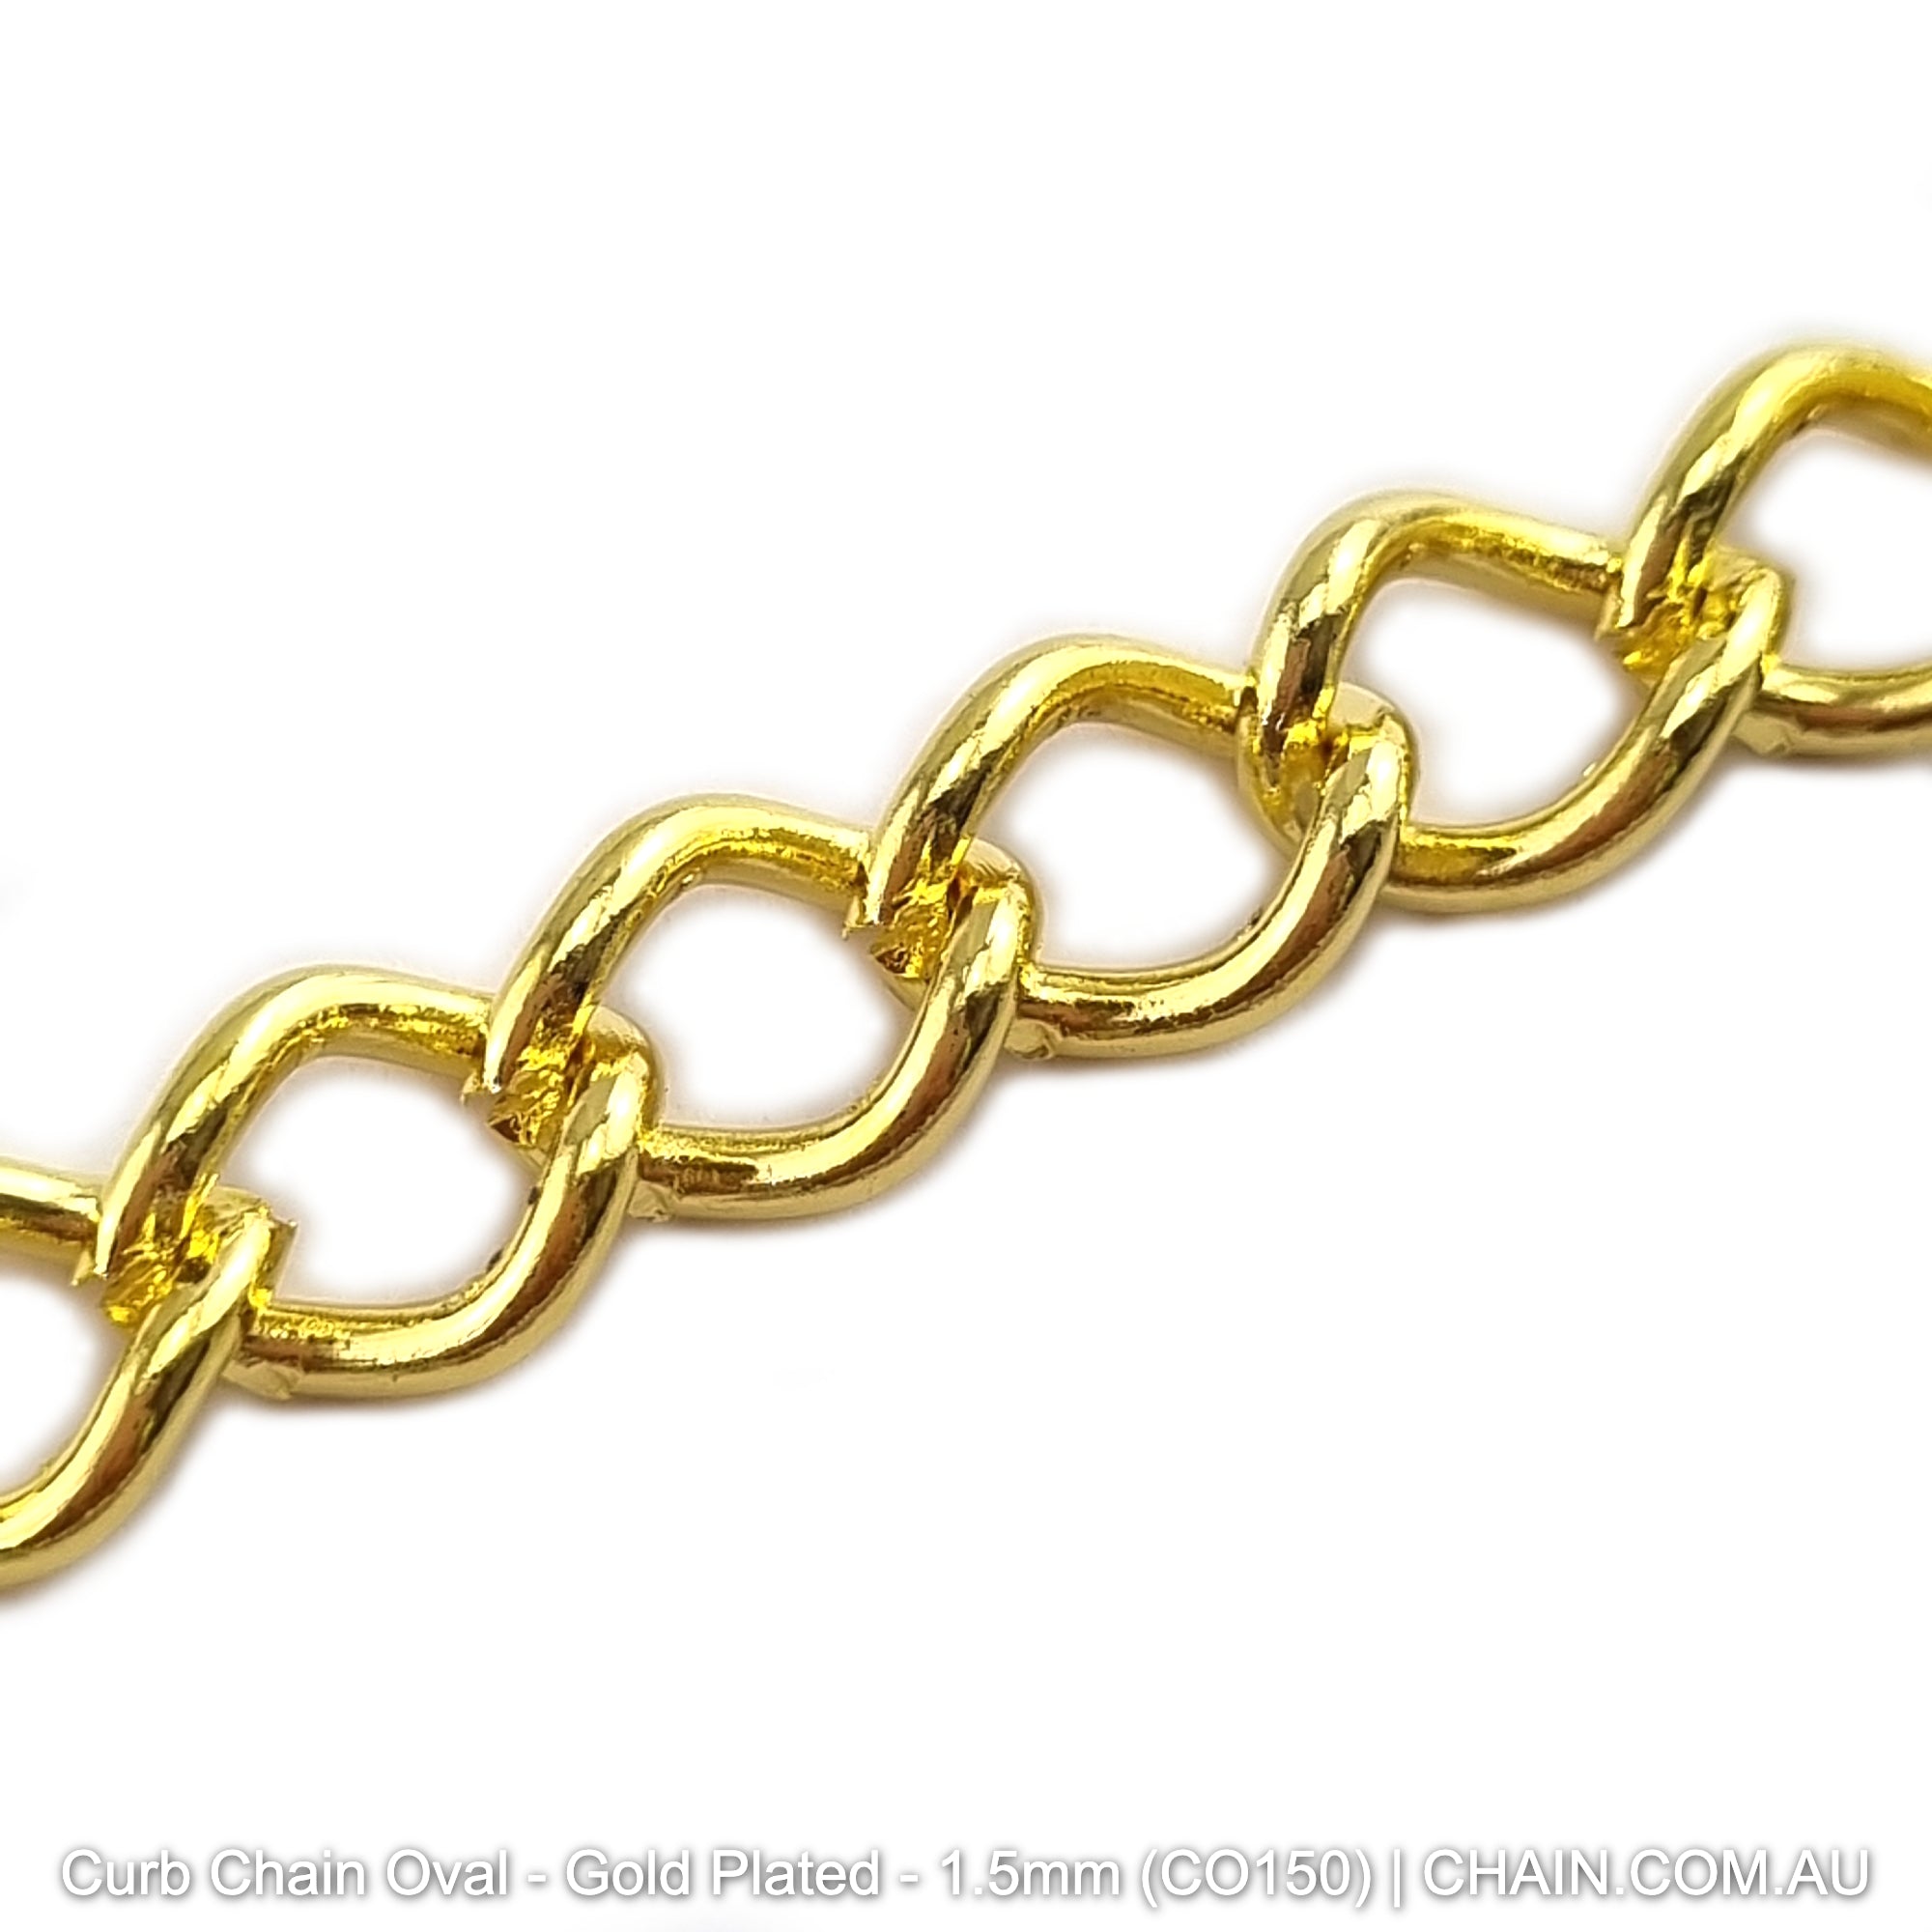 Oval Curb Chain in a Gold Plated Finish. Size: 1.5mm, CO150. Jewellery Chain, Australia wide shipping. Shop chain.com.au